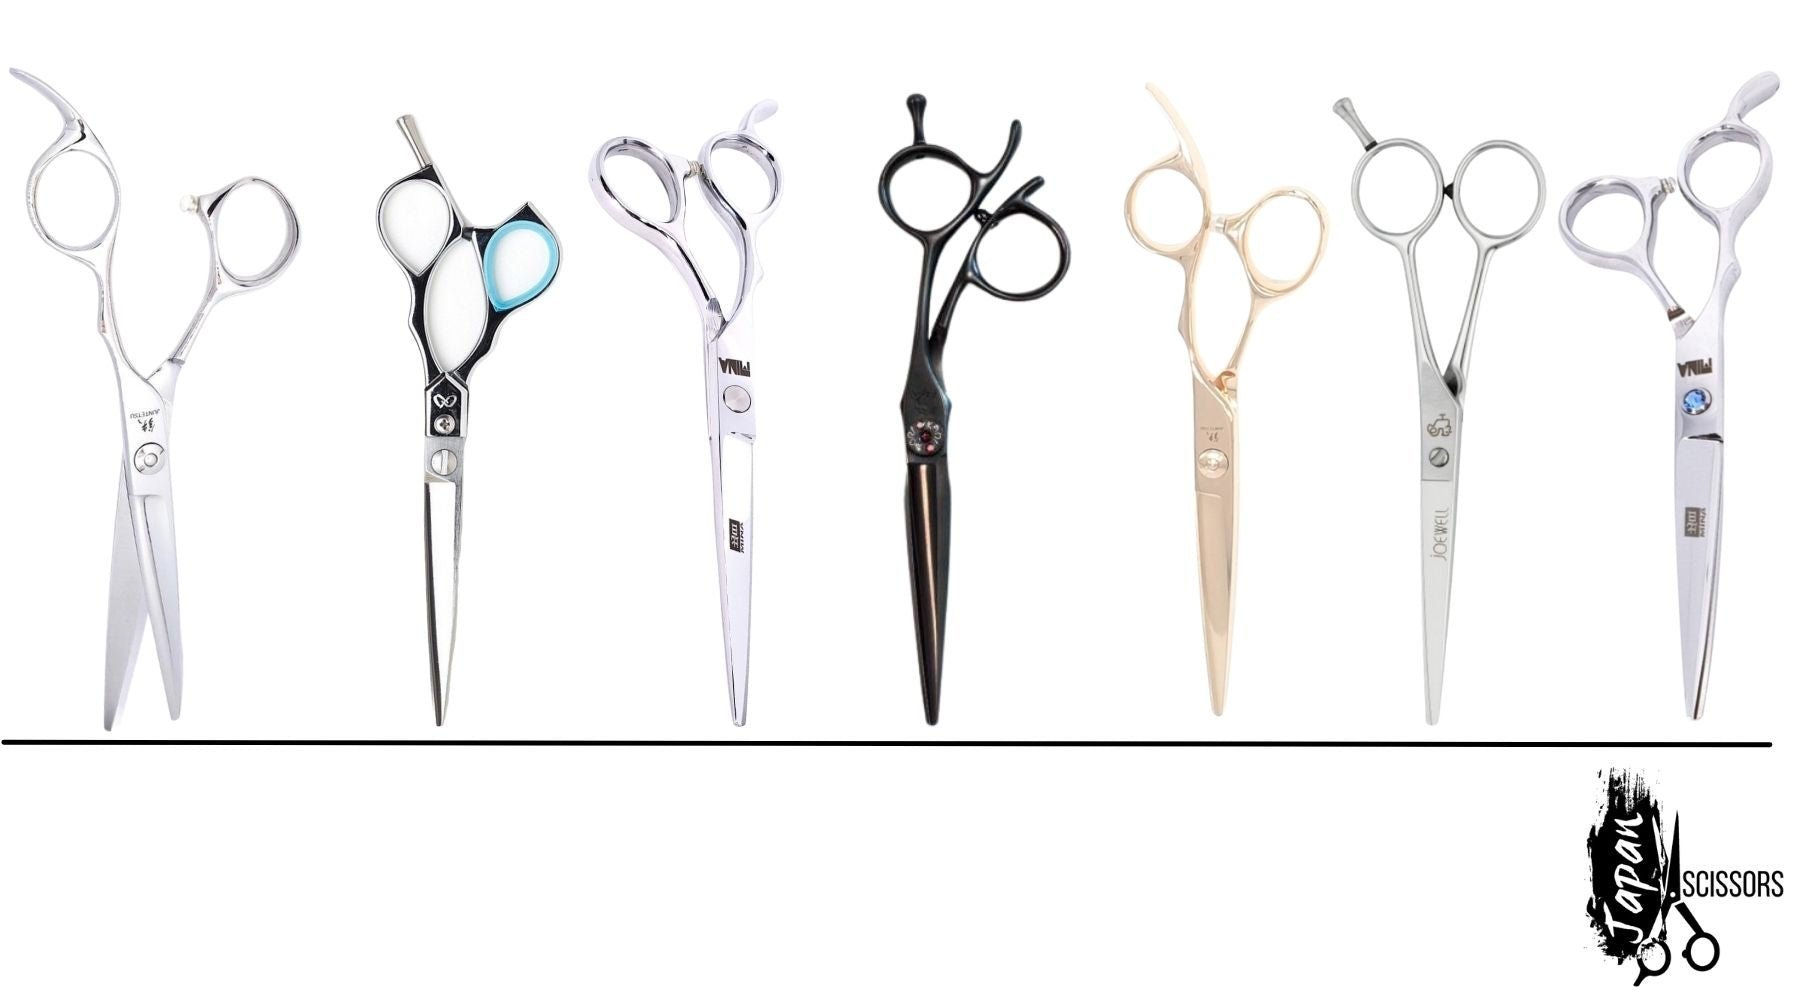 Hair Cutting Shears For Professionals - Japan Scissors USA